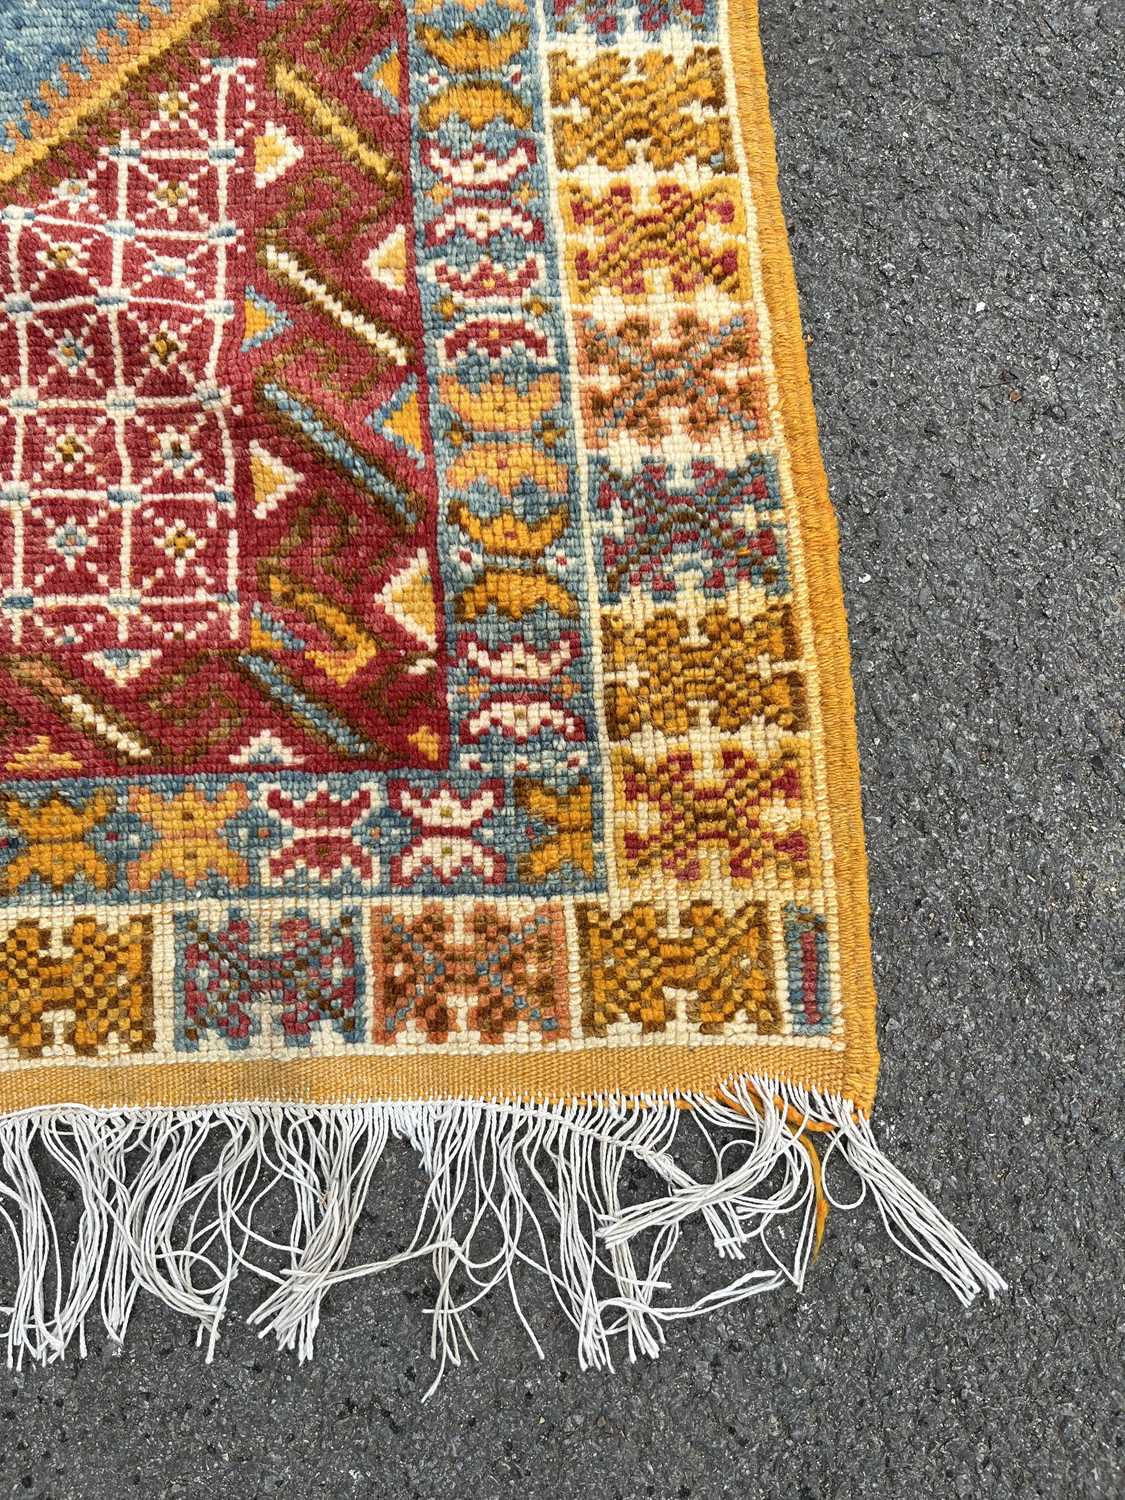 A LARGE MOROCCAN CARPET - Image 4 of 5